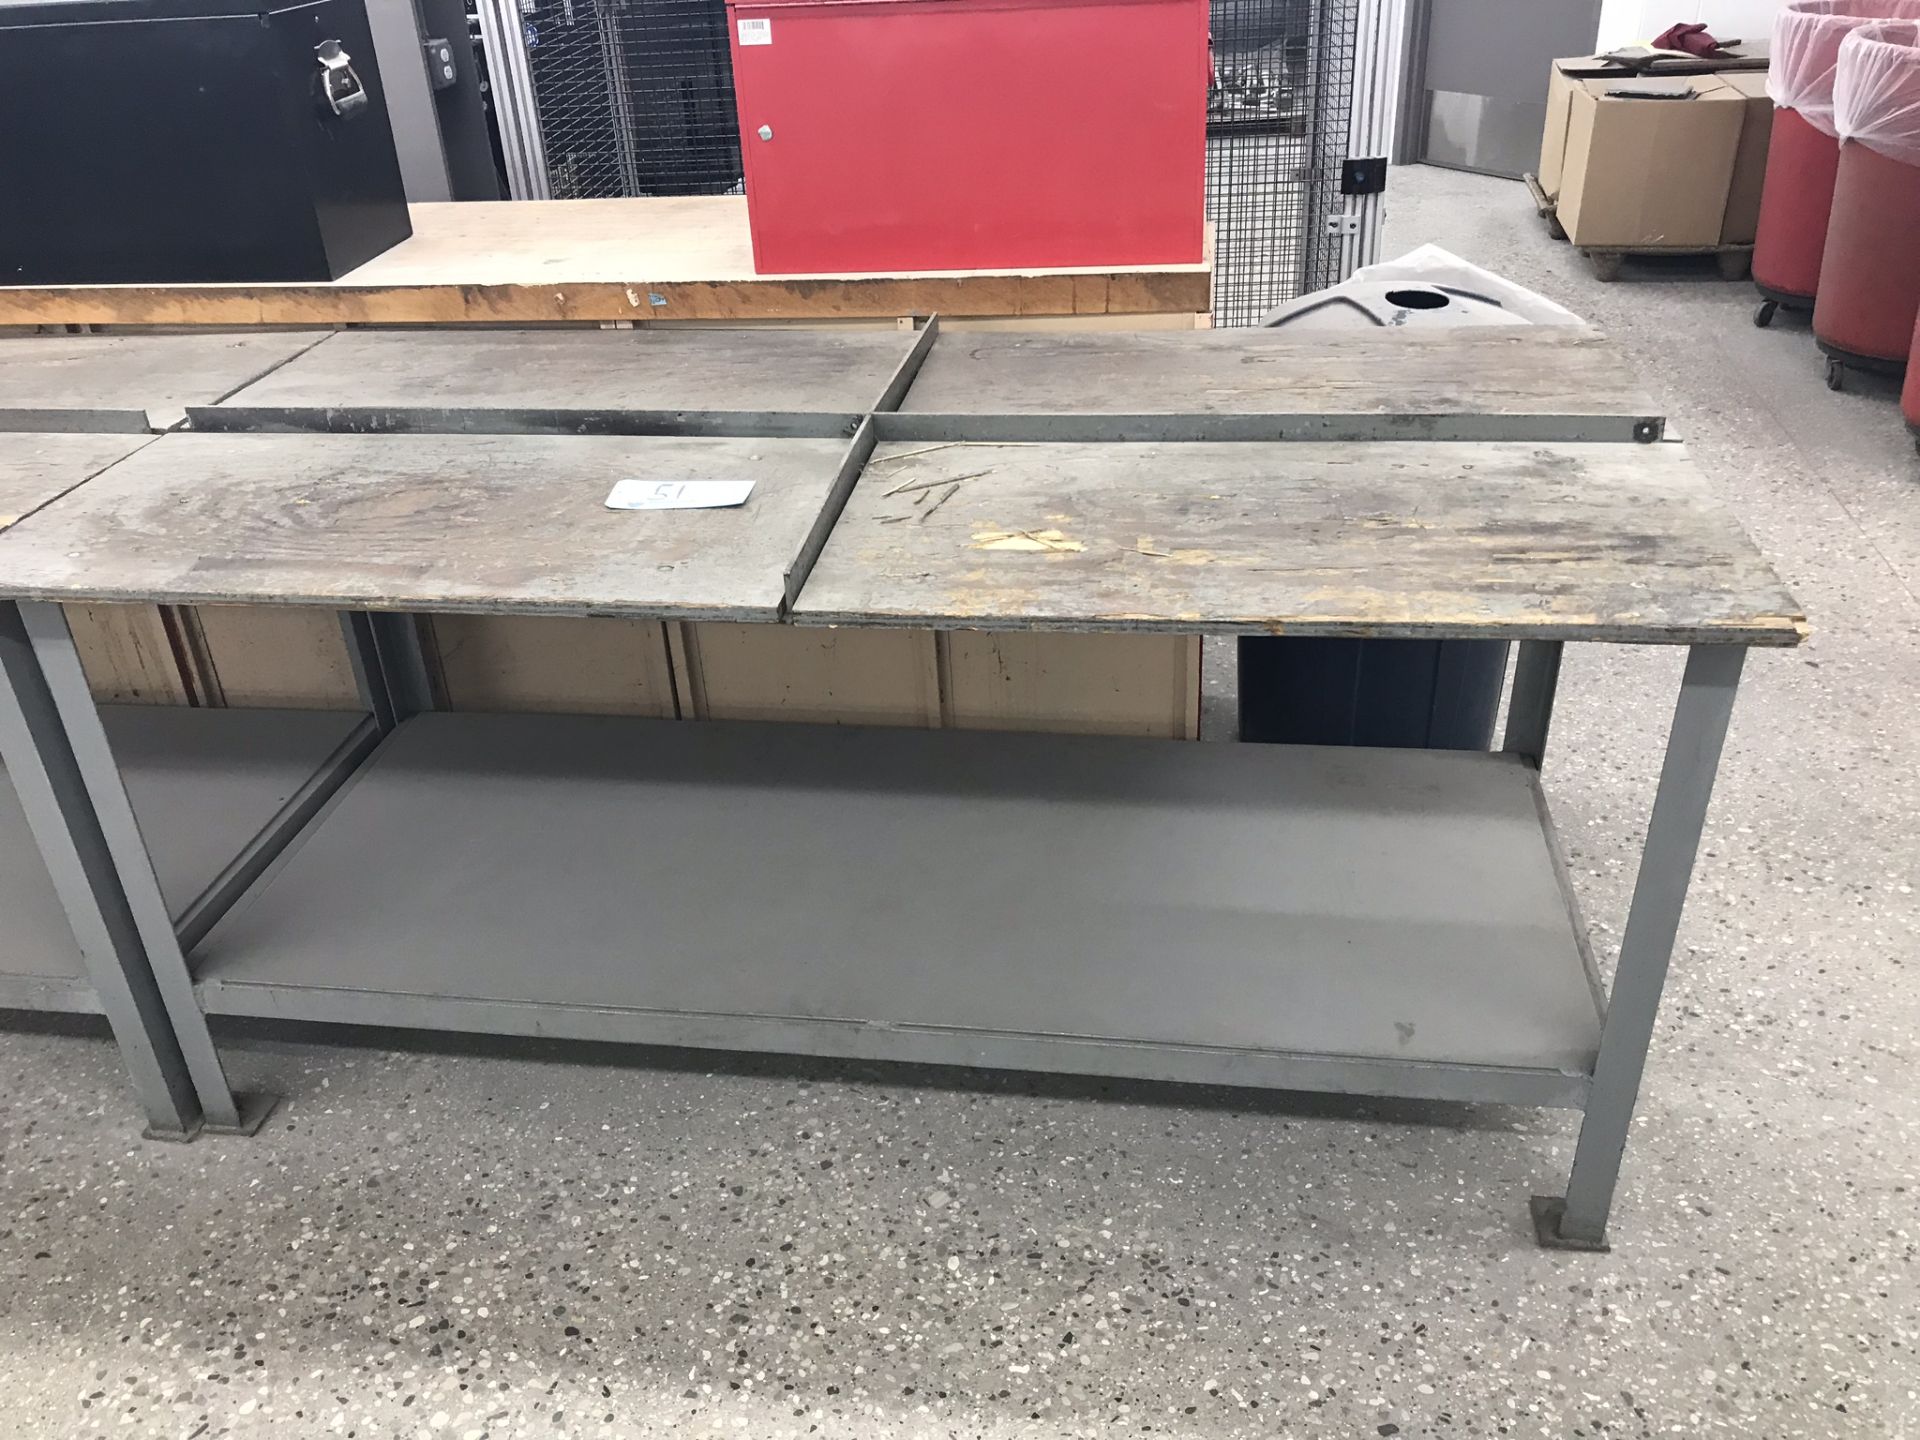 Heavy Duty Steel Work Bench with Wood Top, estimated load capacity of 2,000 pounds. 6' x 3' x 36"